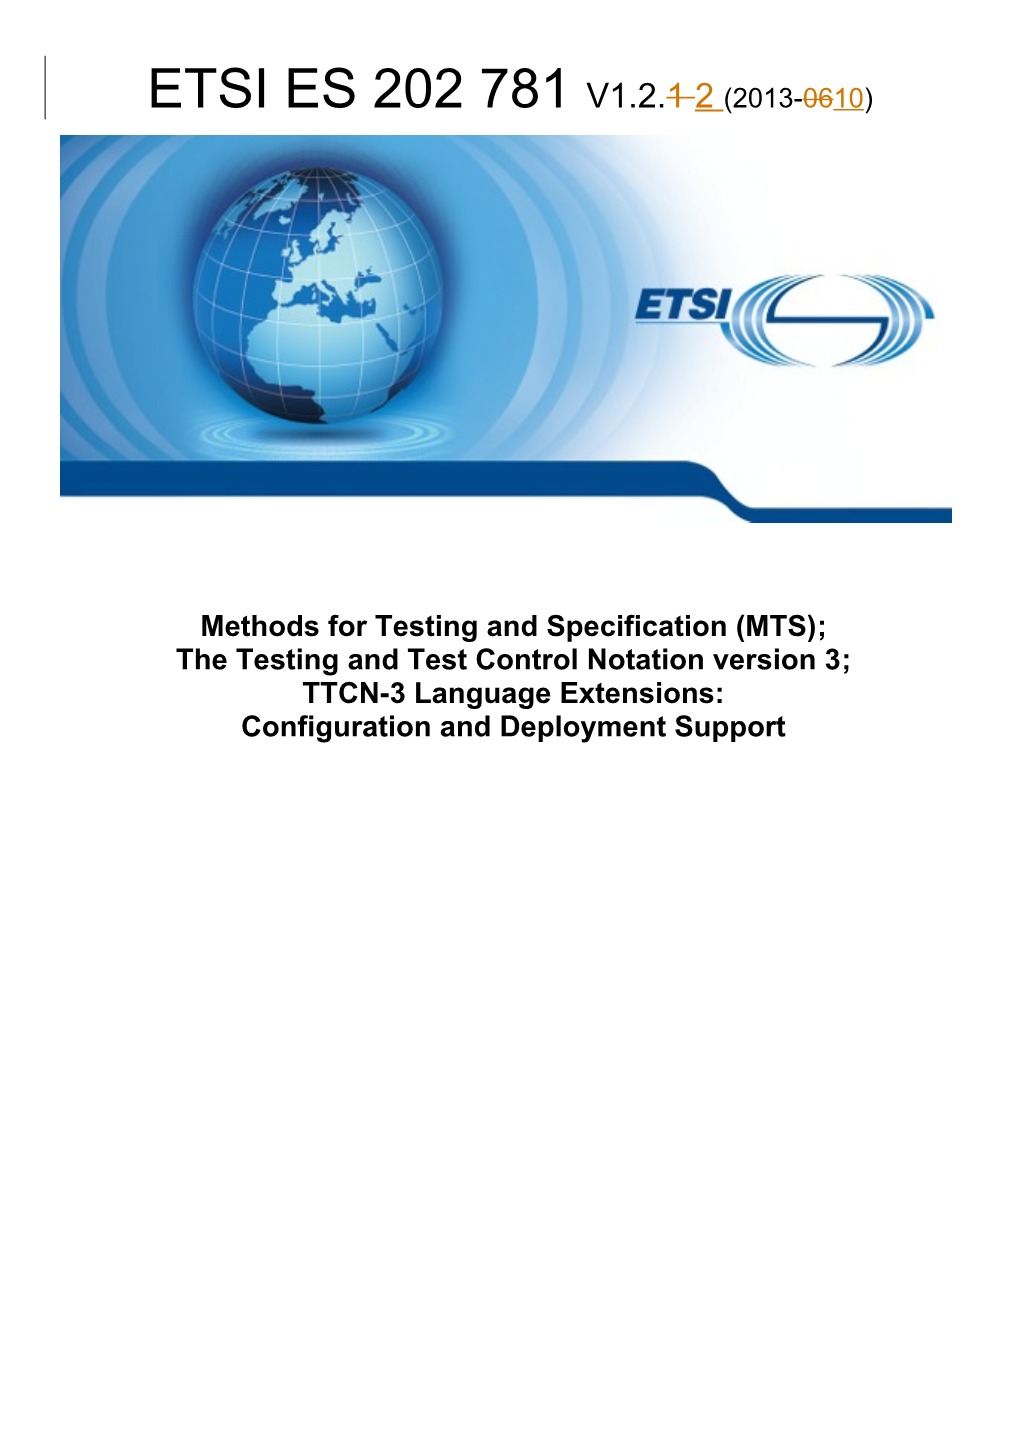 Methods for Testing and Specification (MTS); s1